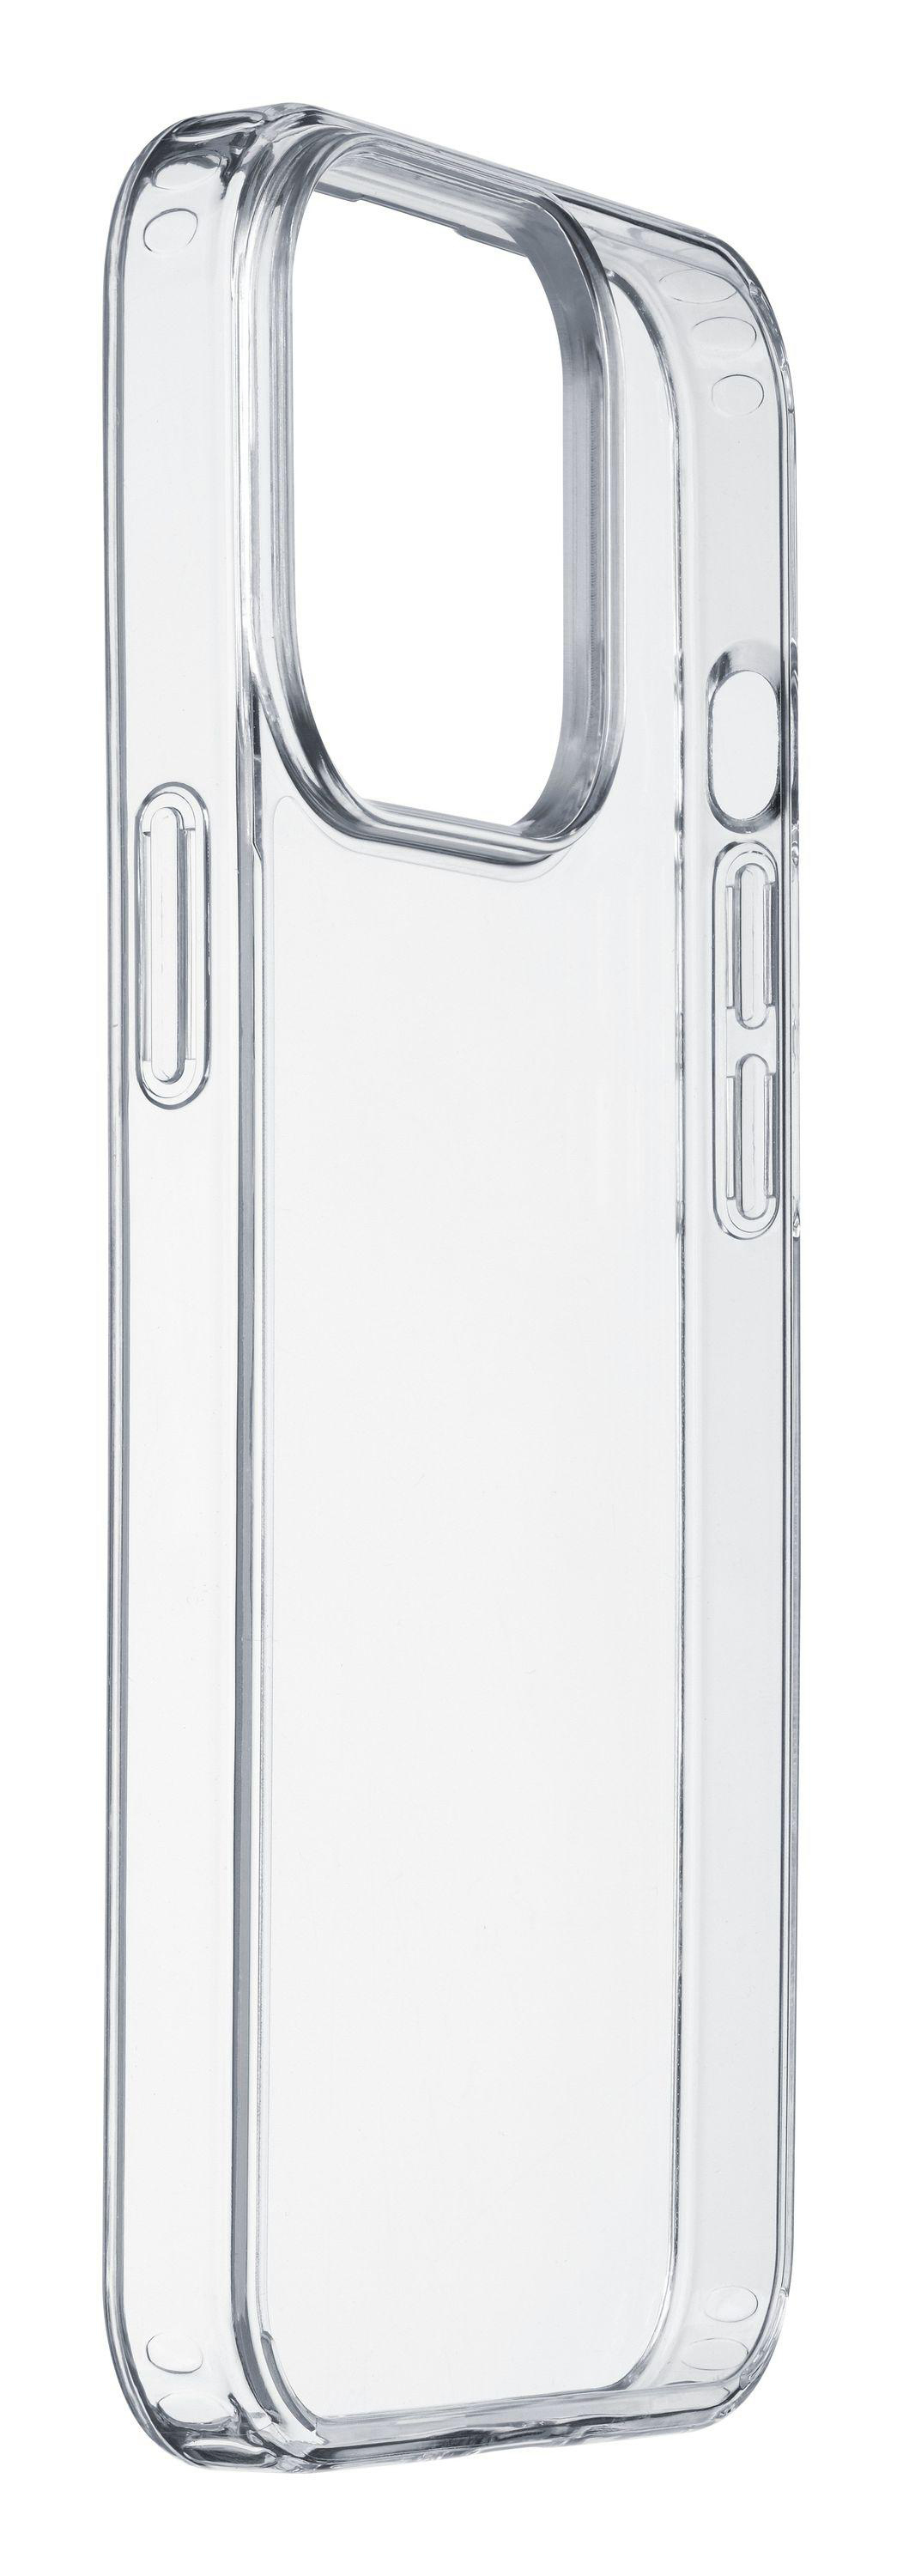 Backcover, 15 Pro, Strong, Clear LINE CELLULAR Apple, Transparent iPhone